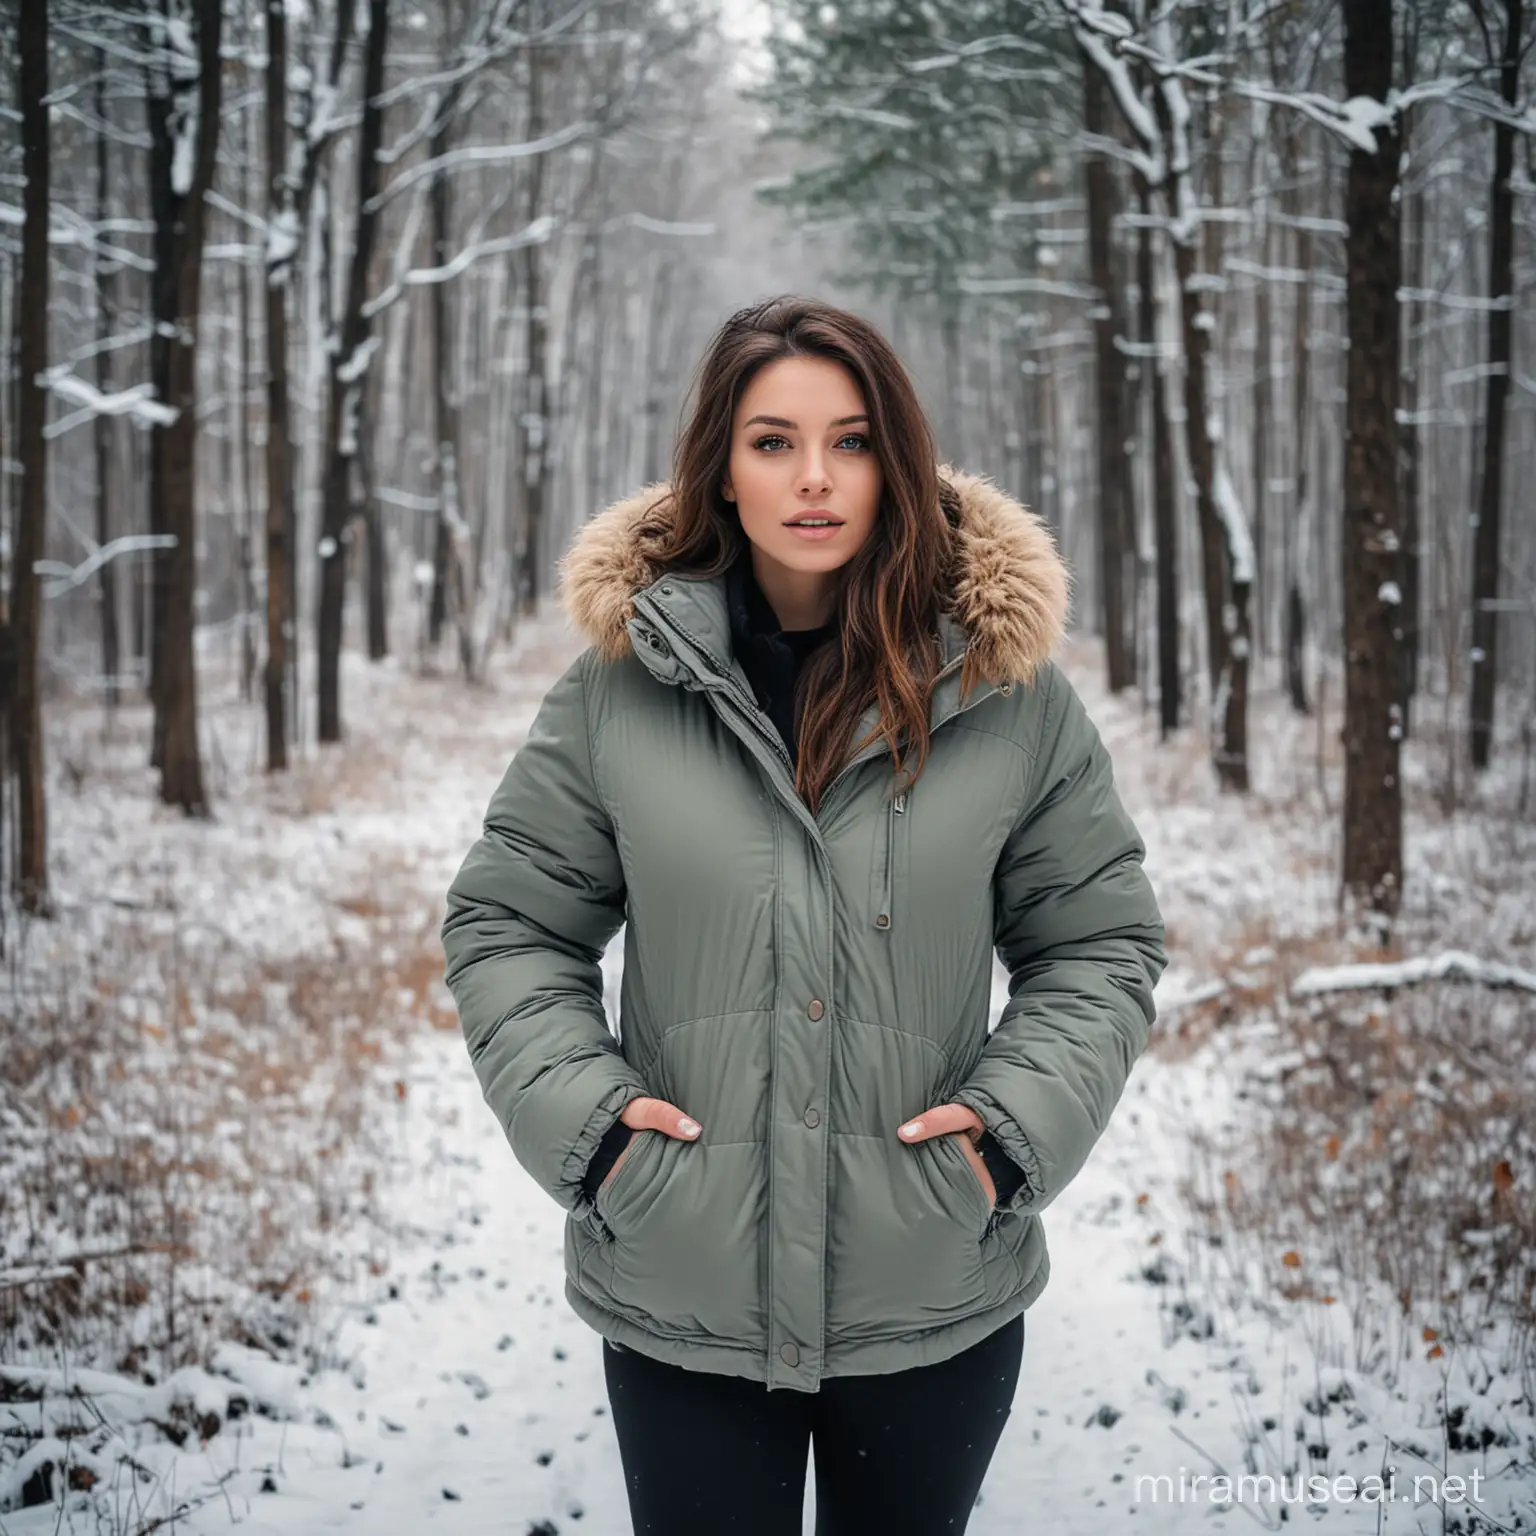 Stylish Woman in Snowy Forest Wearing Thick Jacket